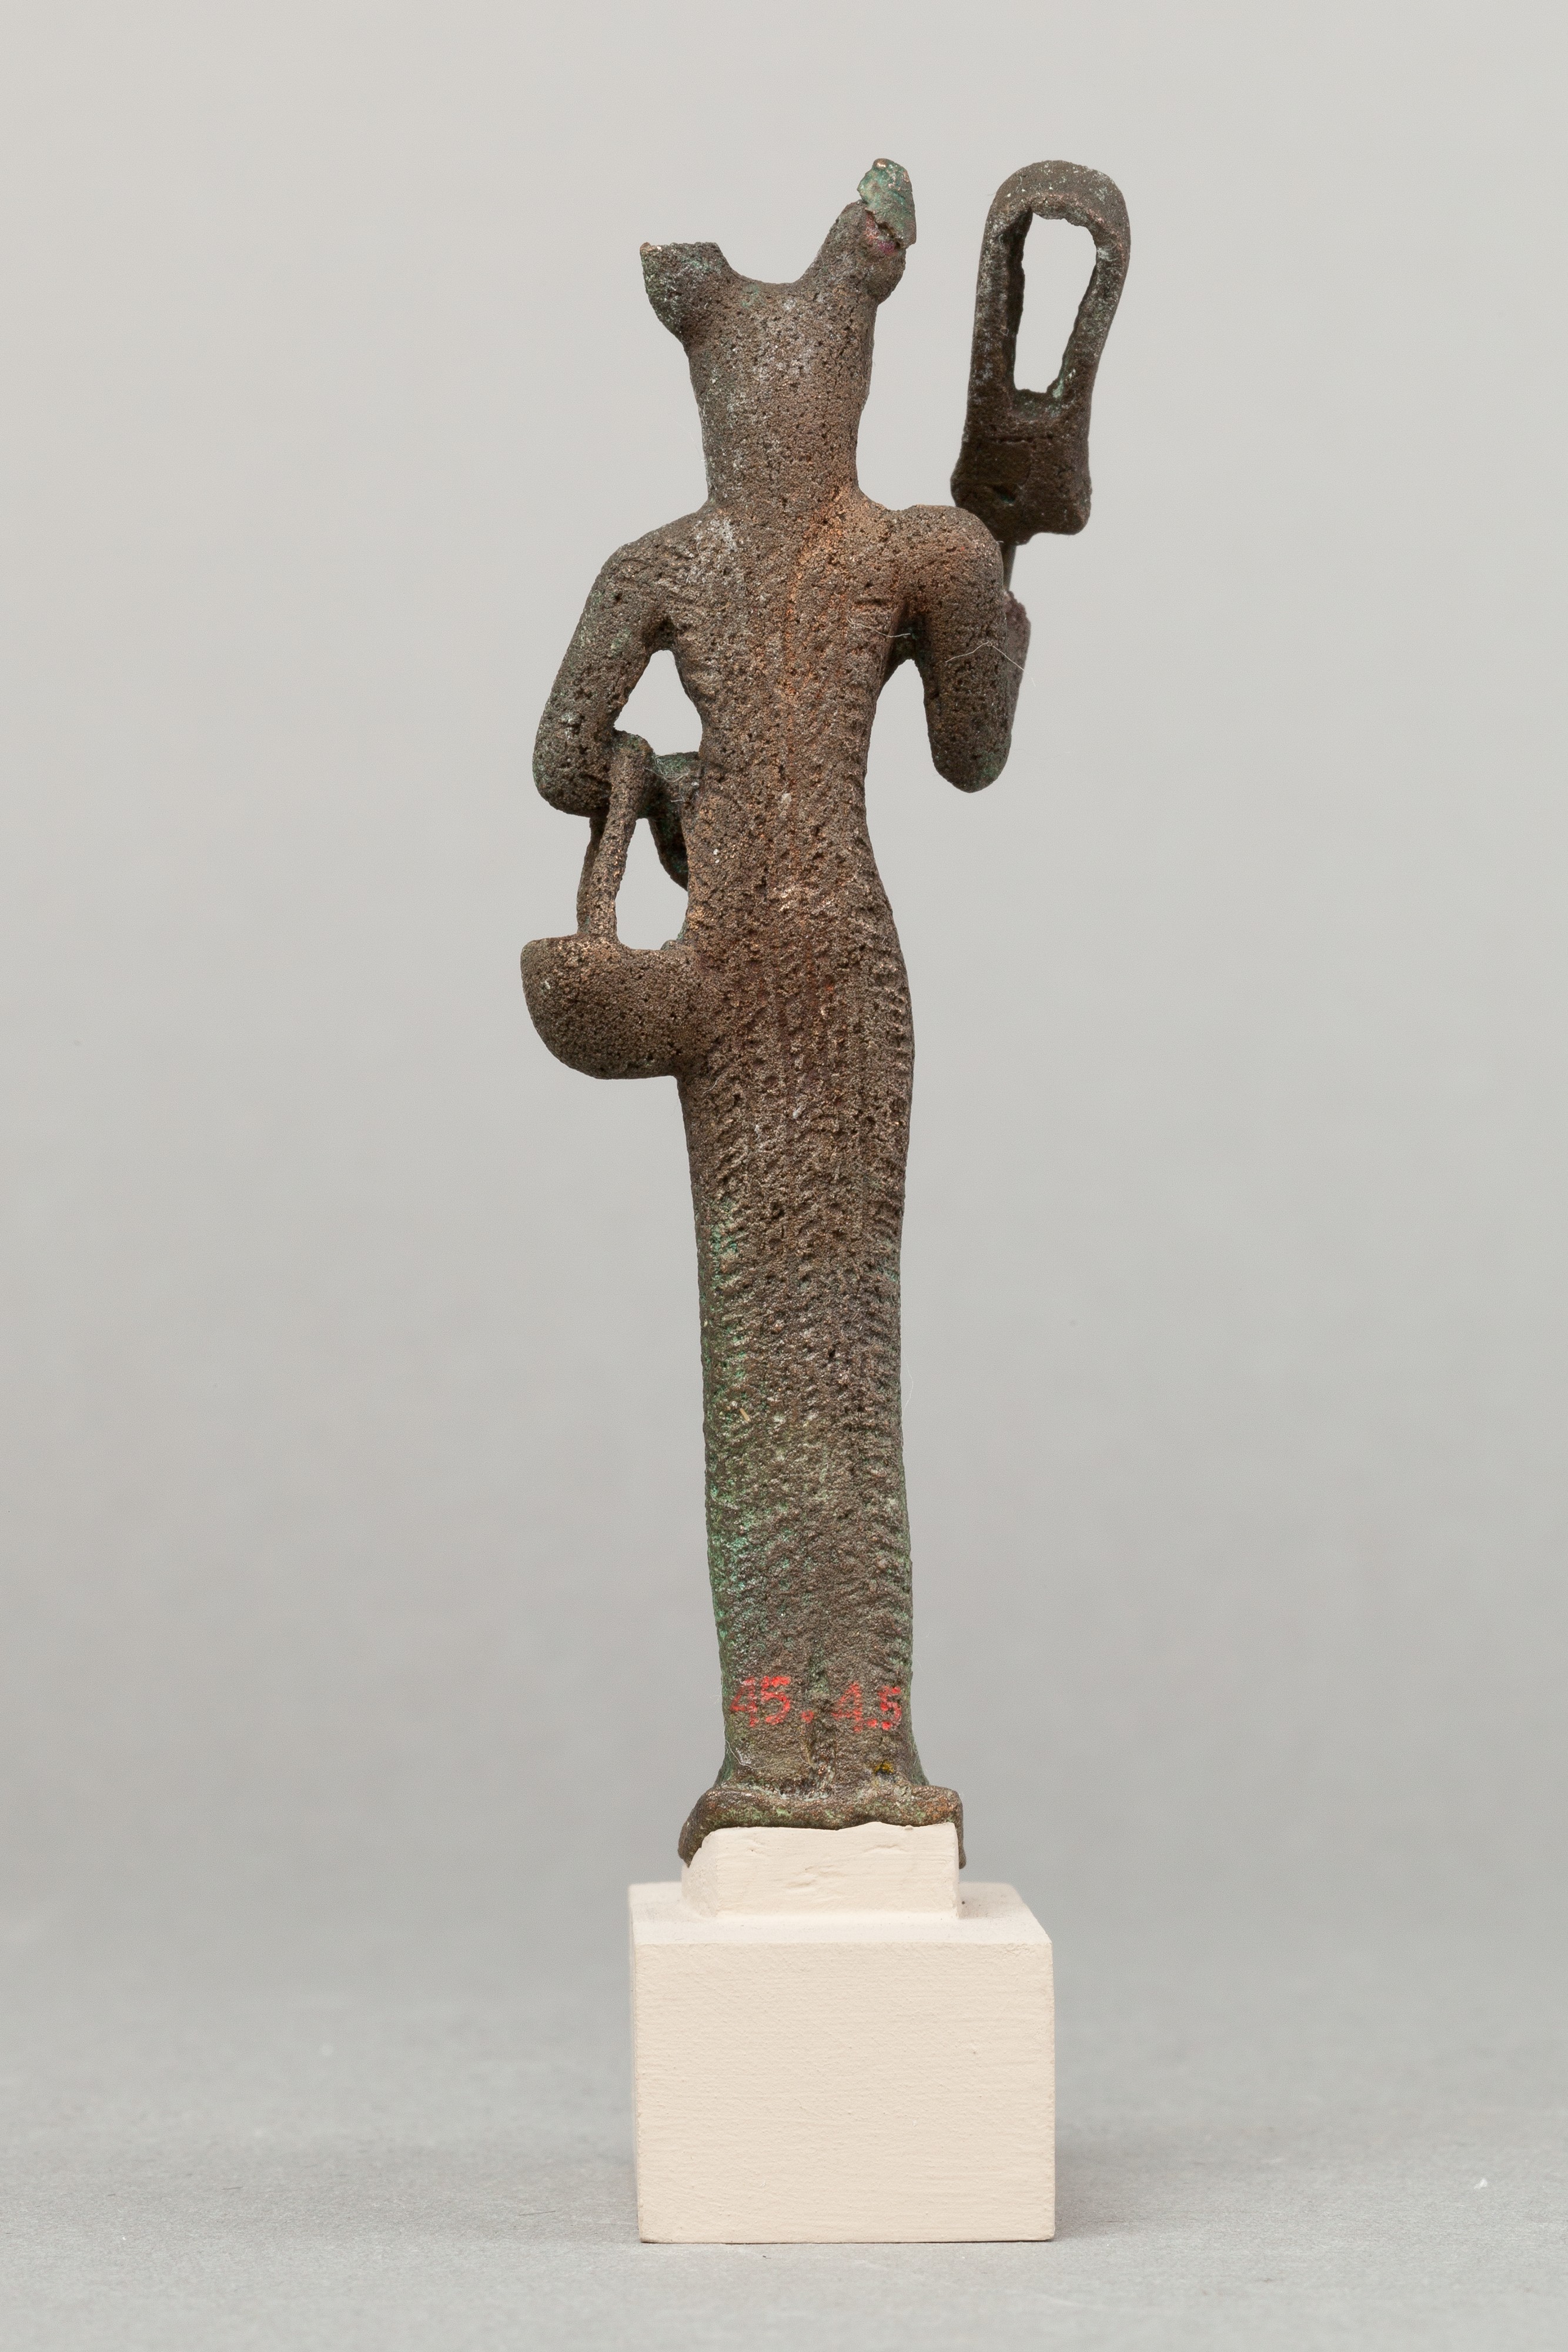 Bastet Holding Sistrum Late Periodptolemaic Period The 